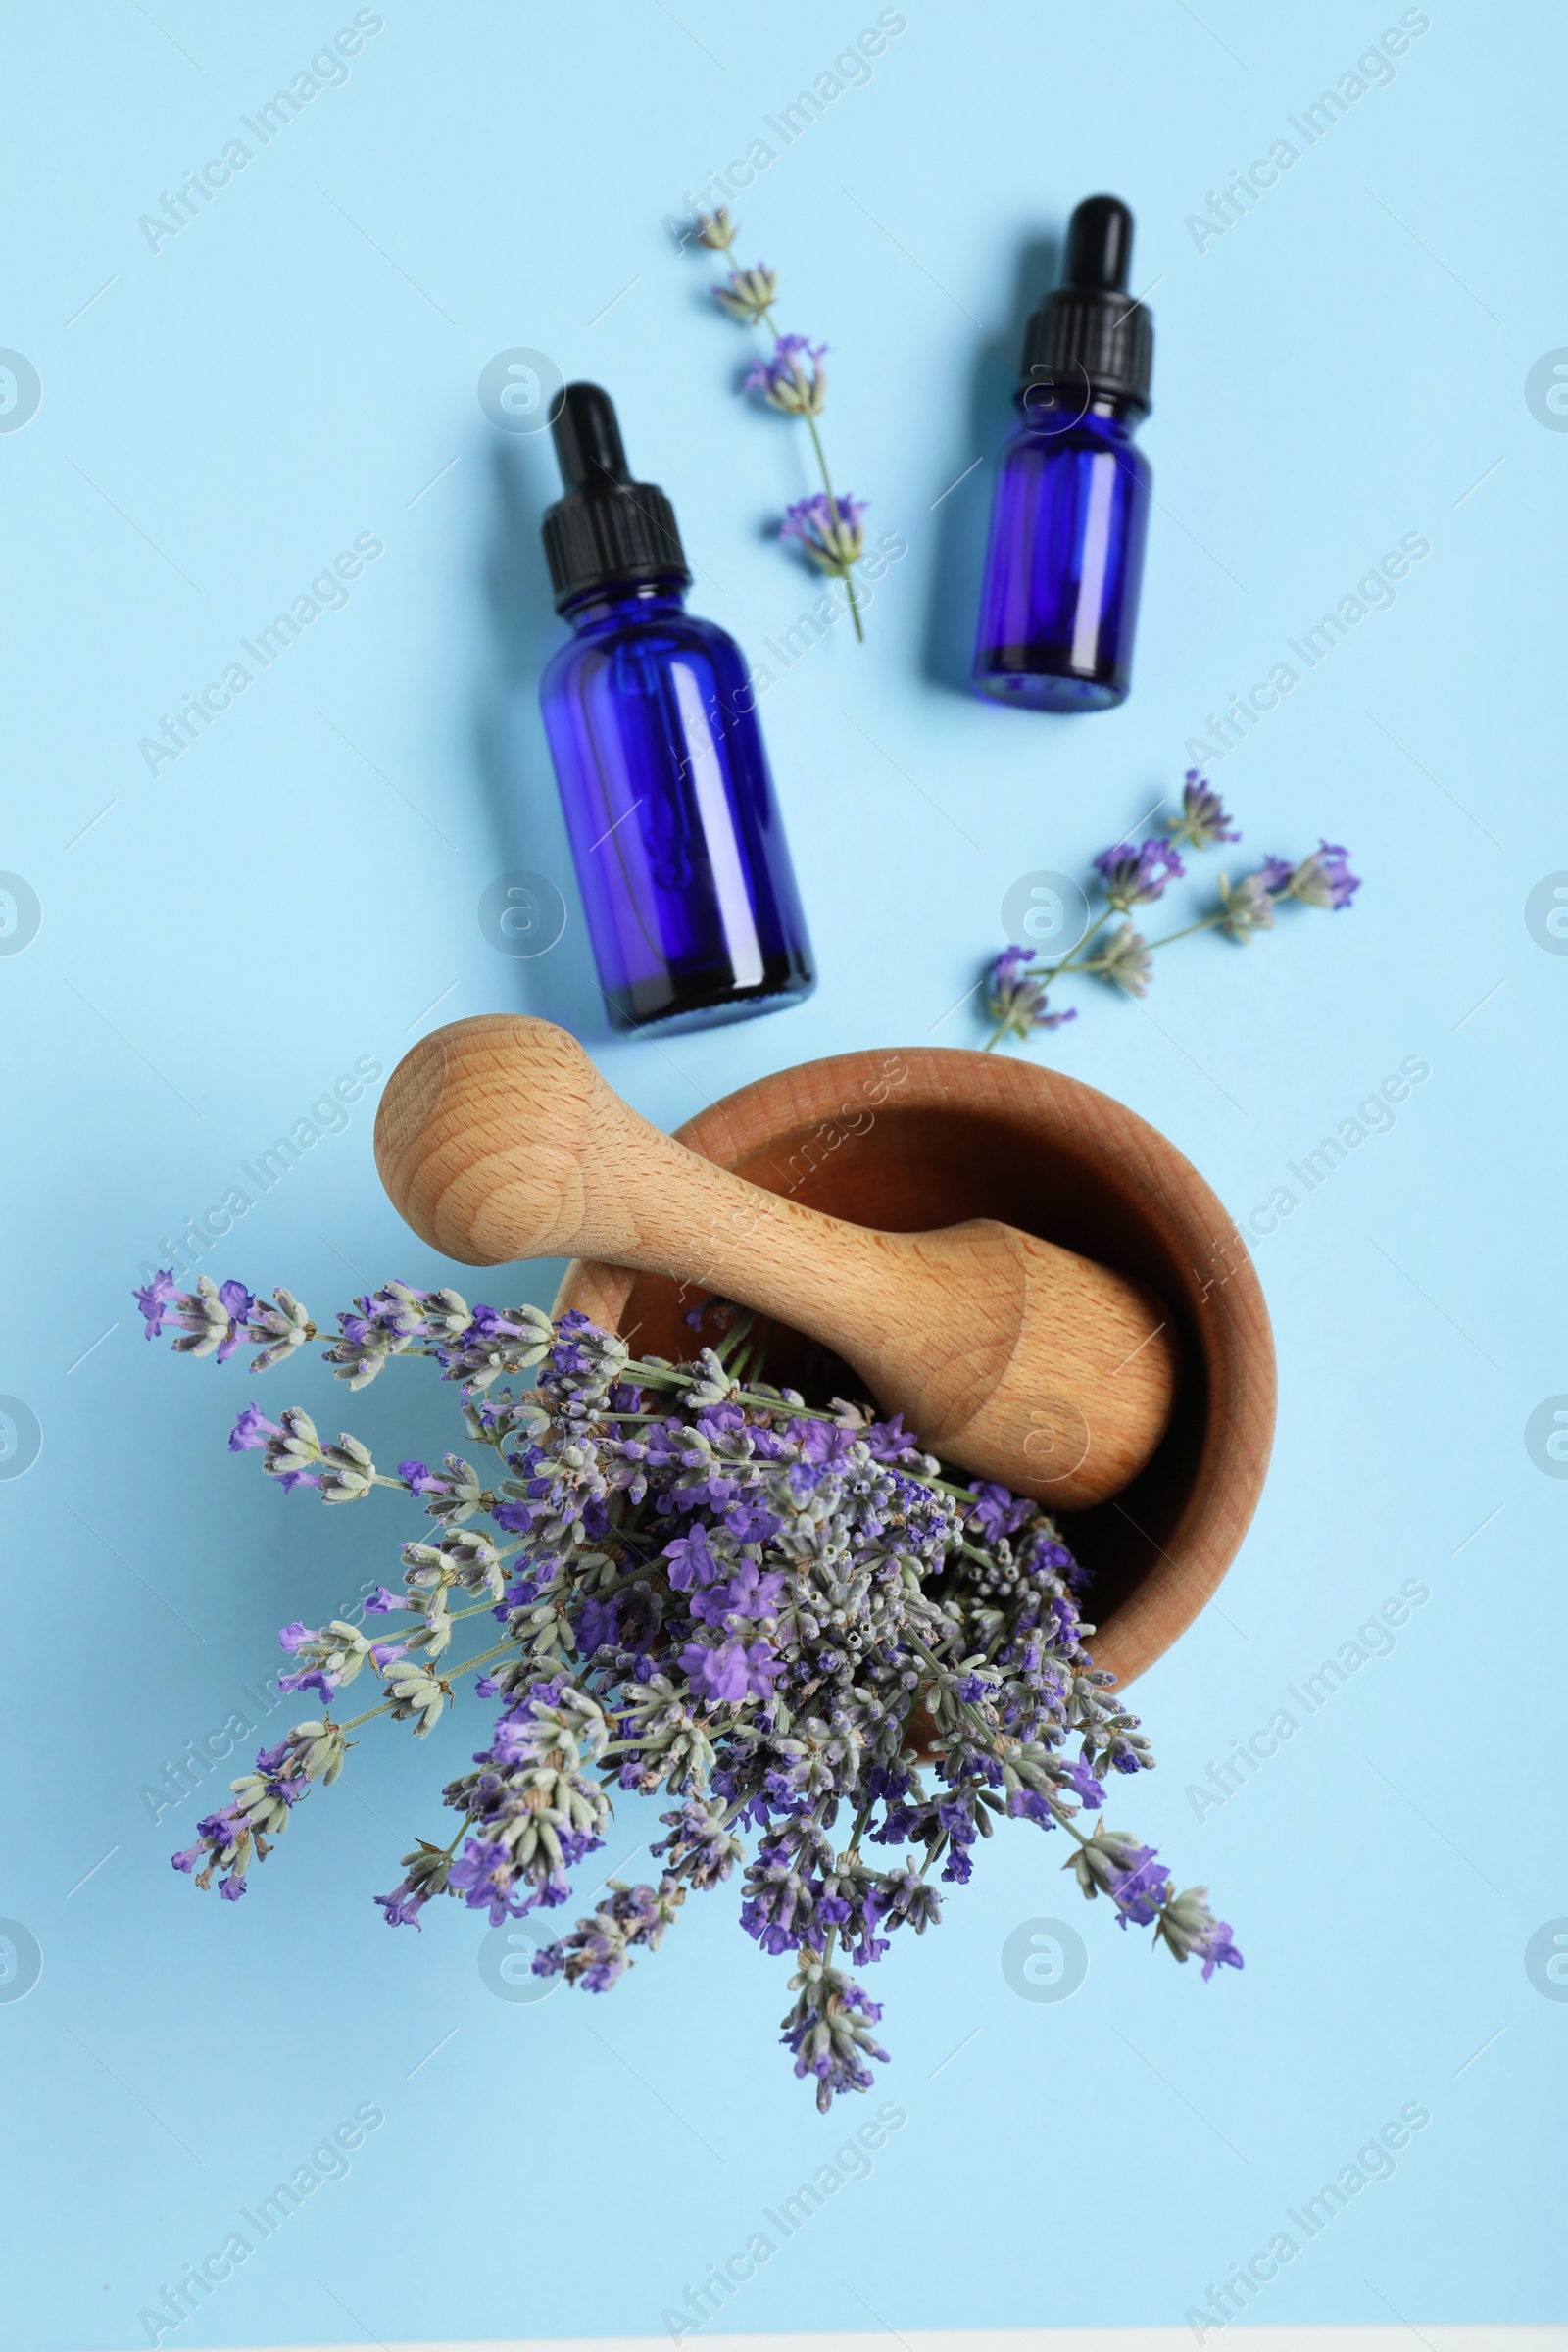 Photo of Bottles of essential oil, mortar and pestle with lavender on light blue background, flat lay